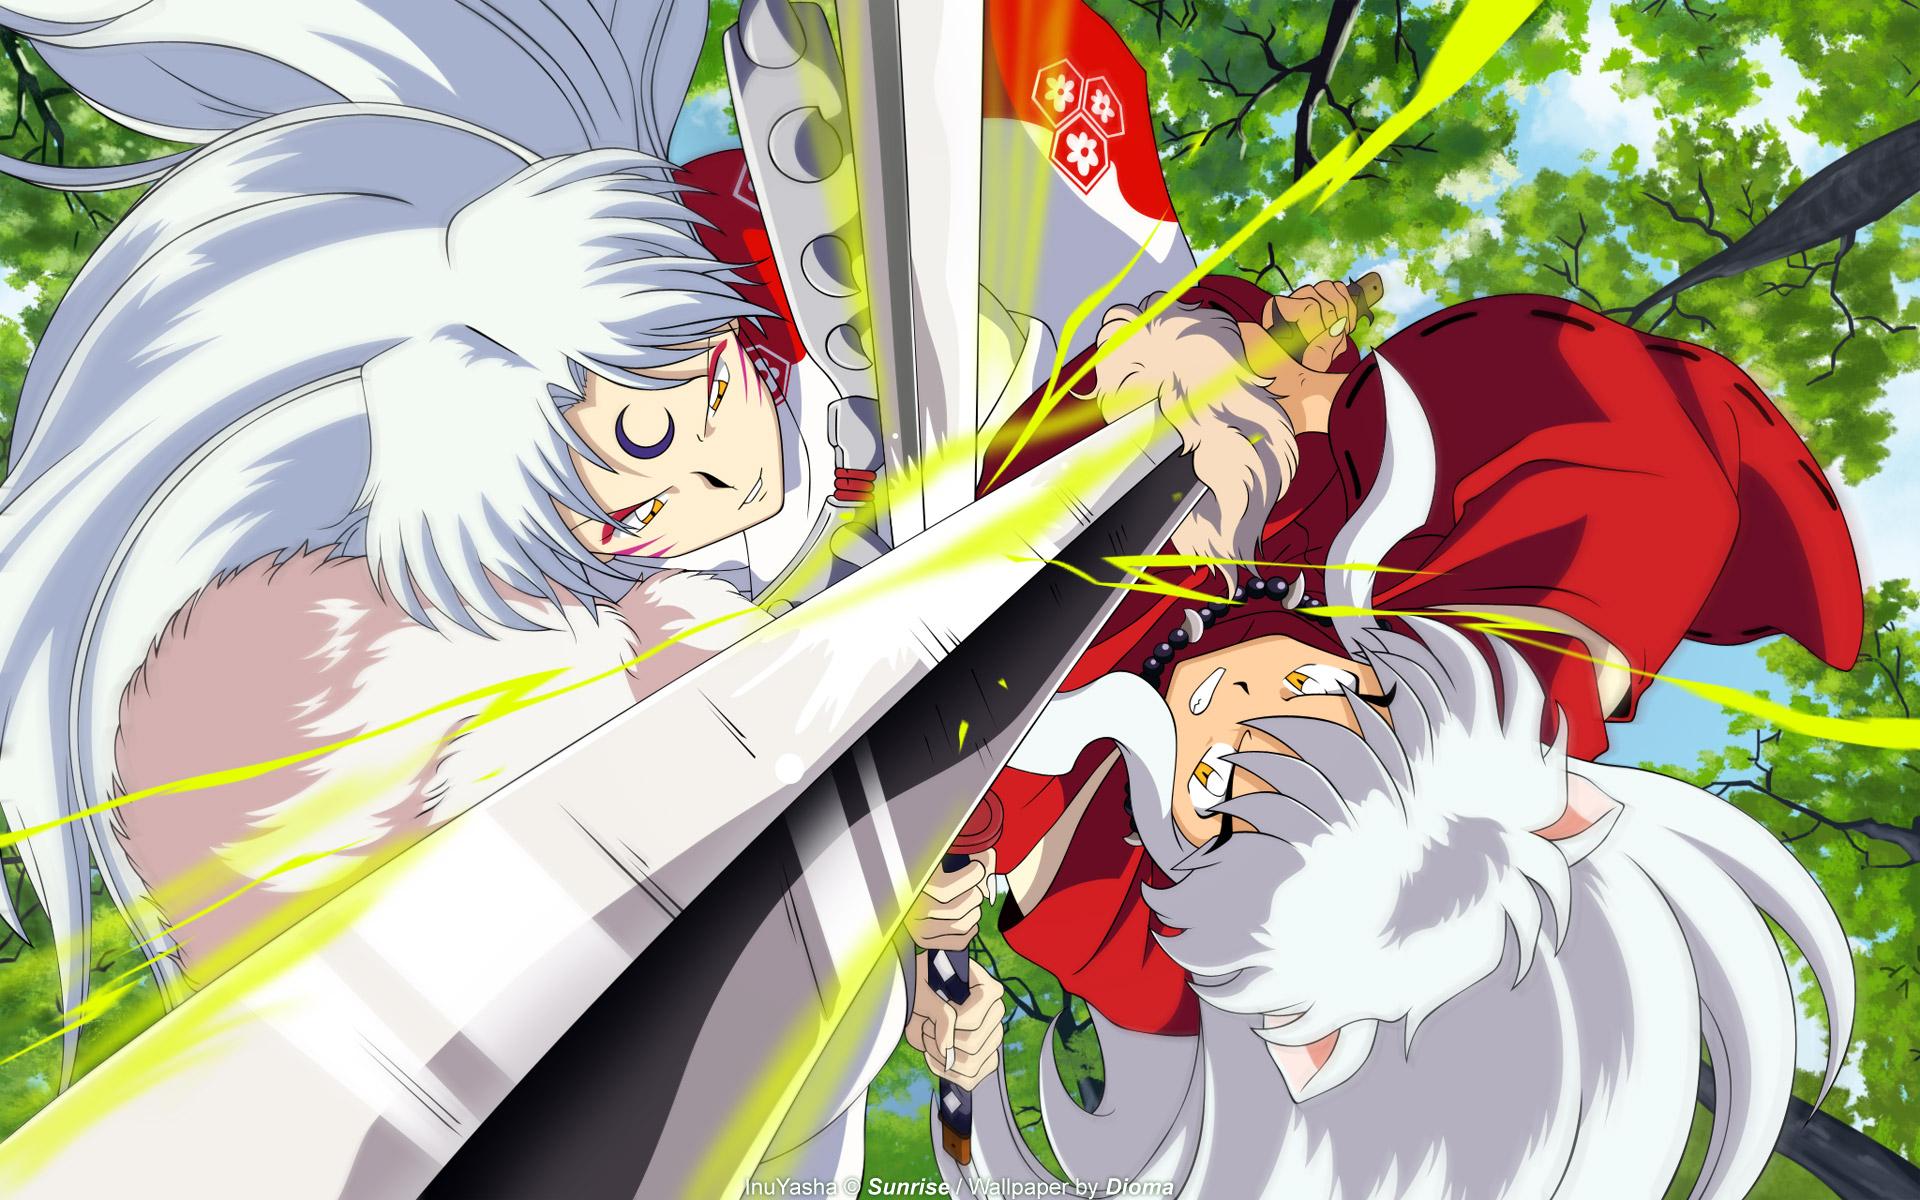 Rejoice Anime Fans! A New Inuyasha Sequel Is Currently In The Works